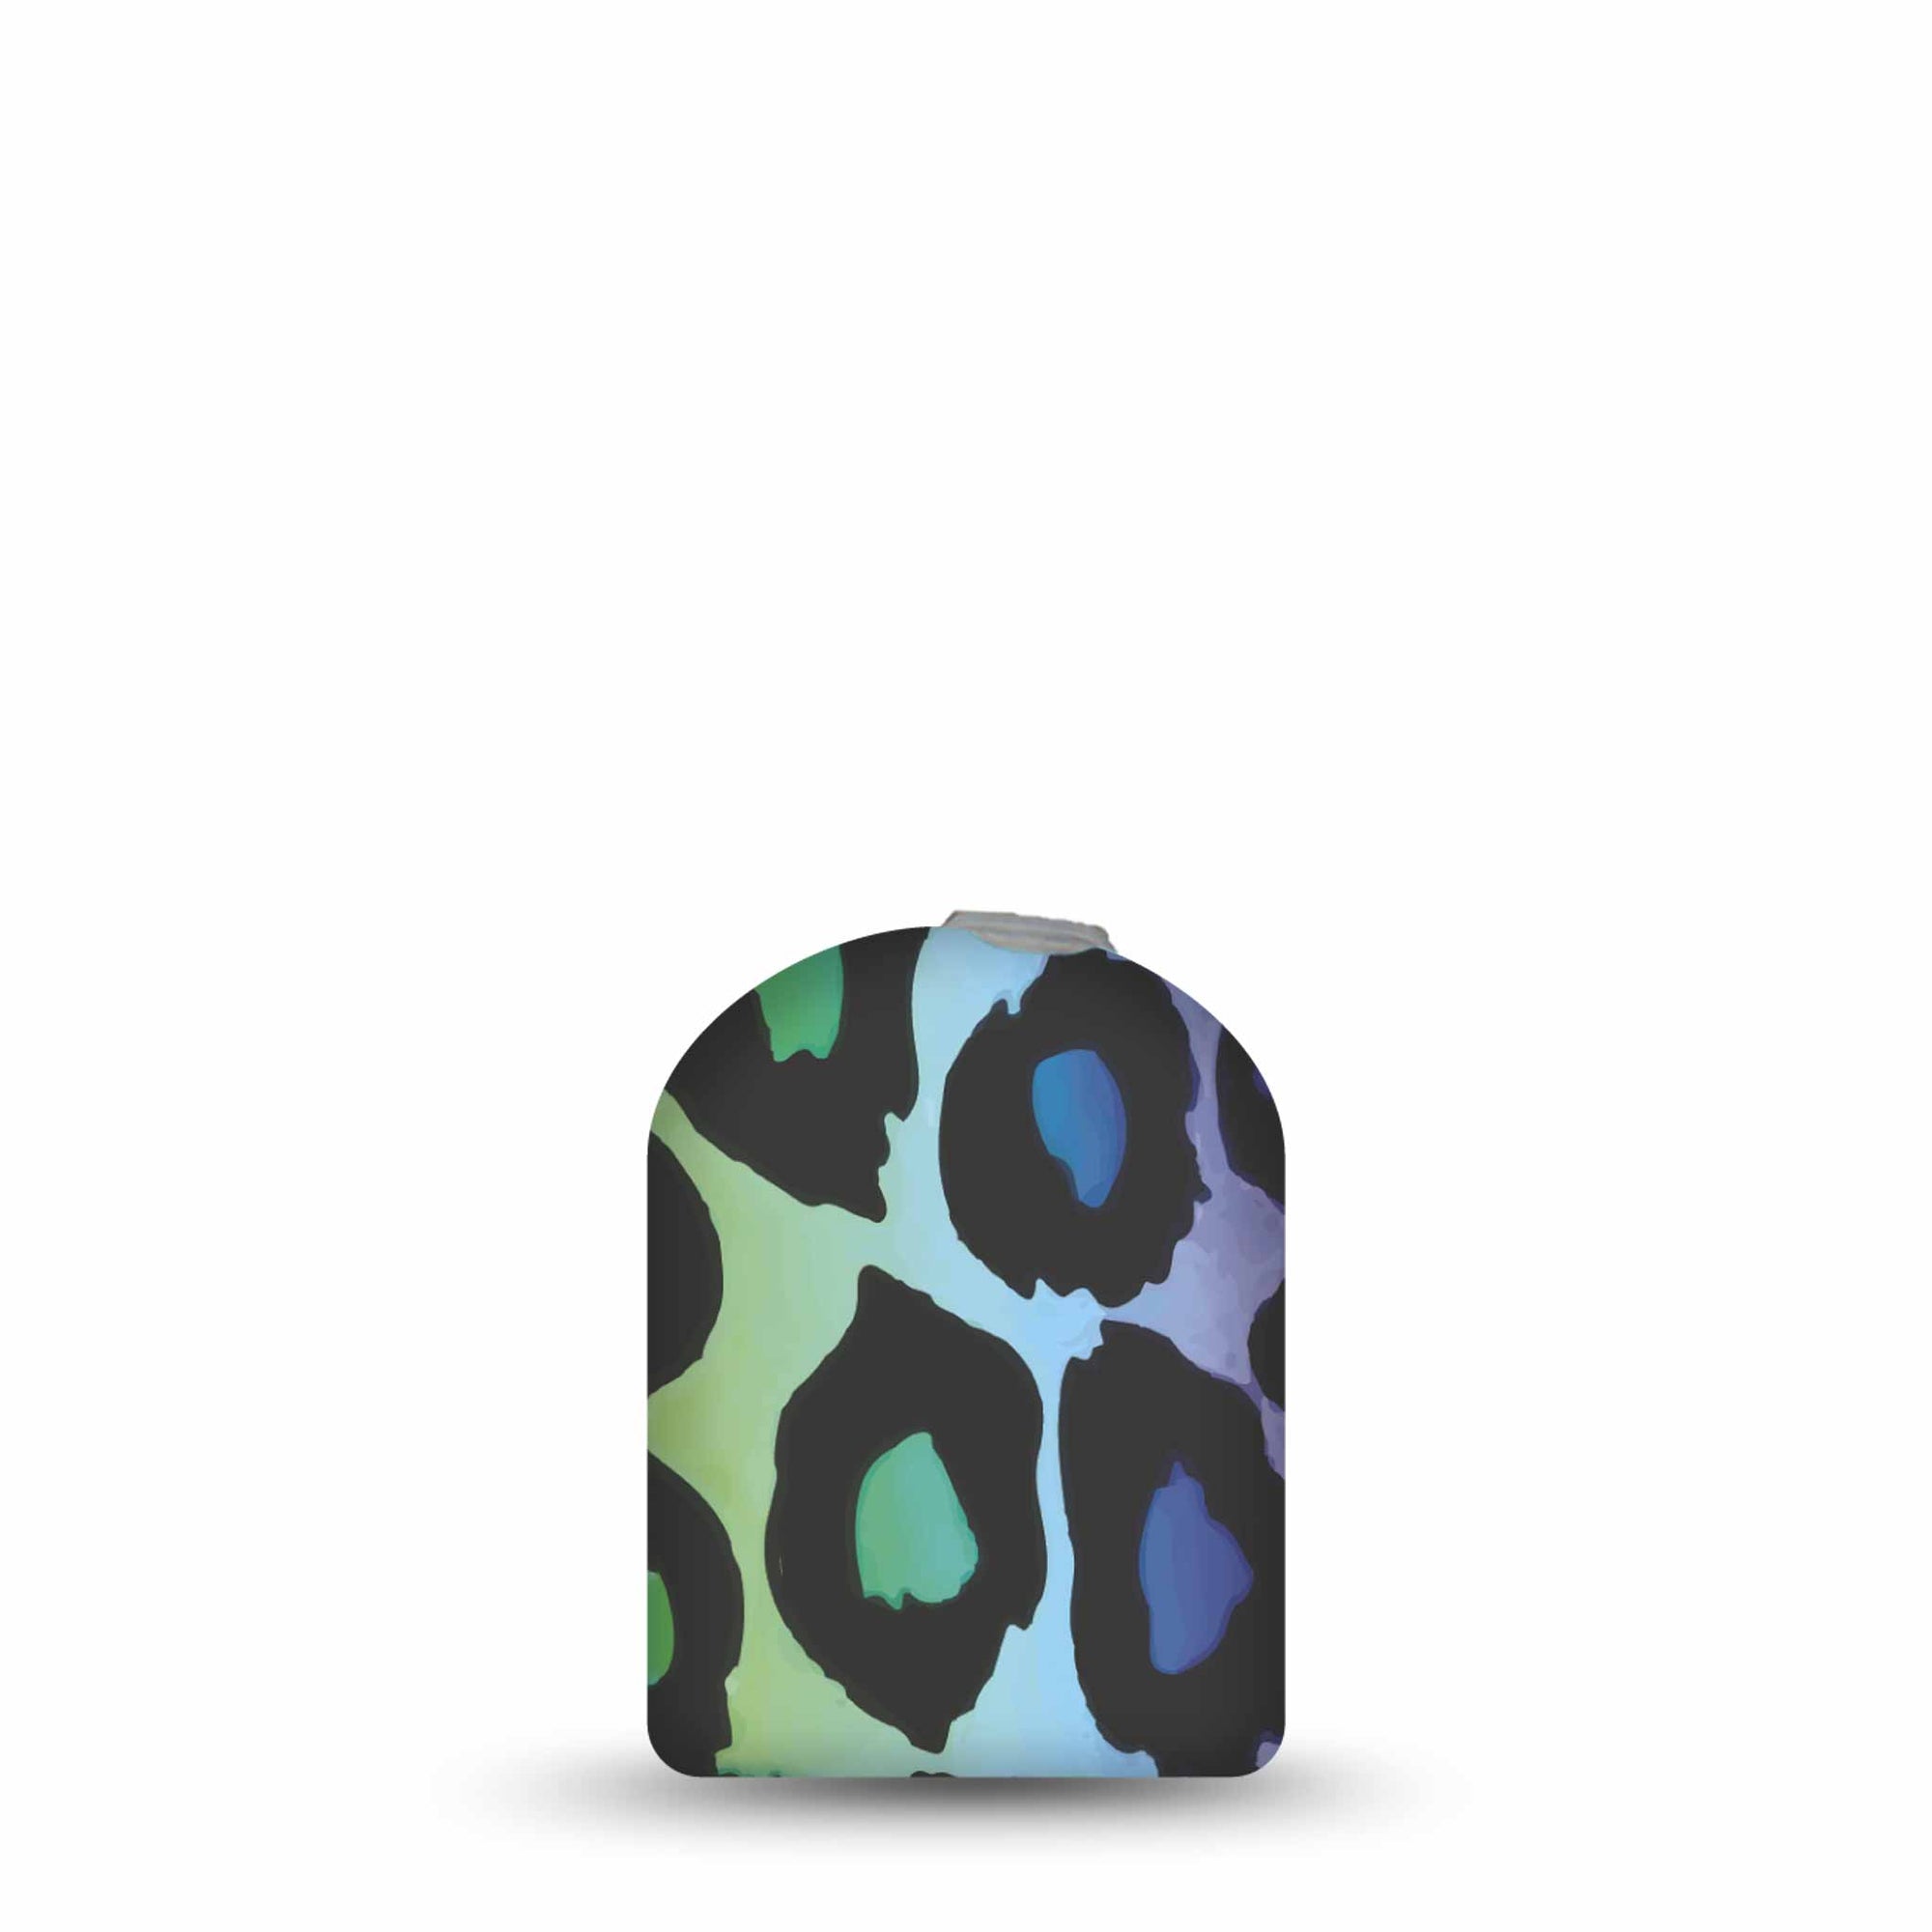 ExpressionMed Multicolored Cheetah Print Pod Transmitter Sticker